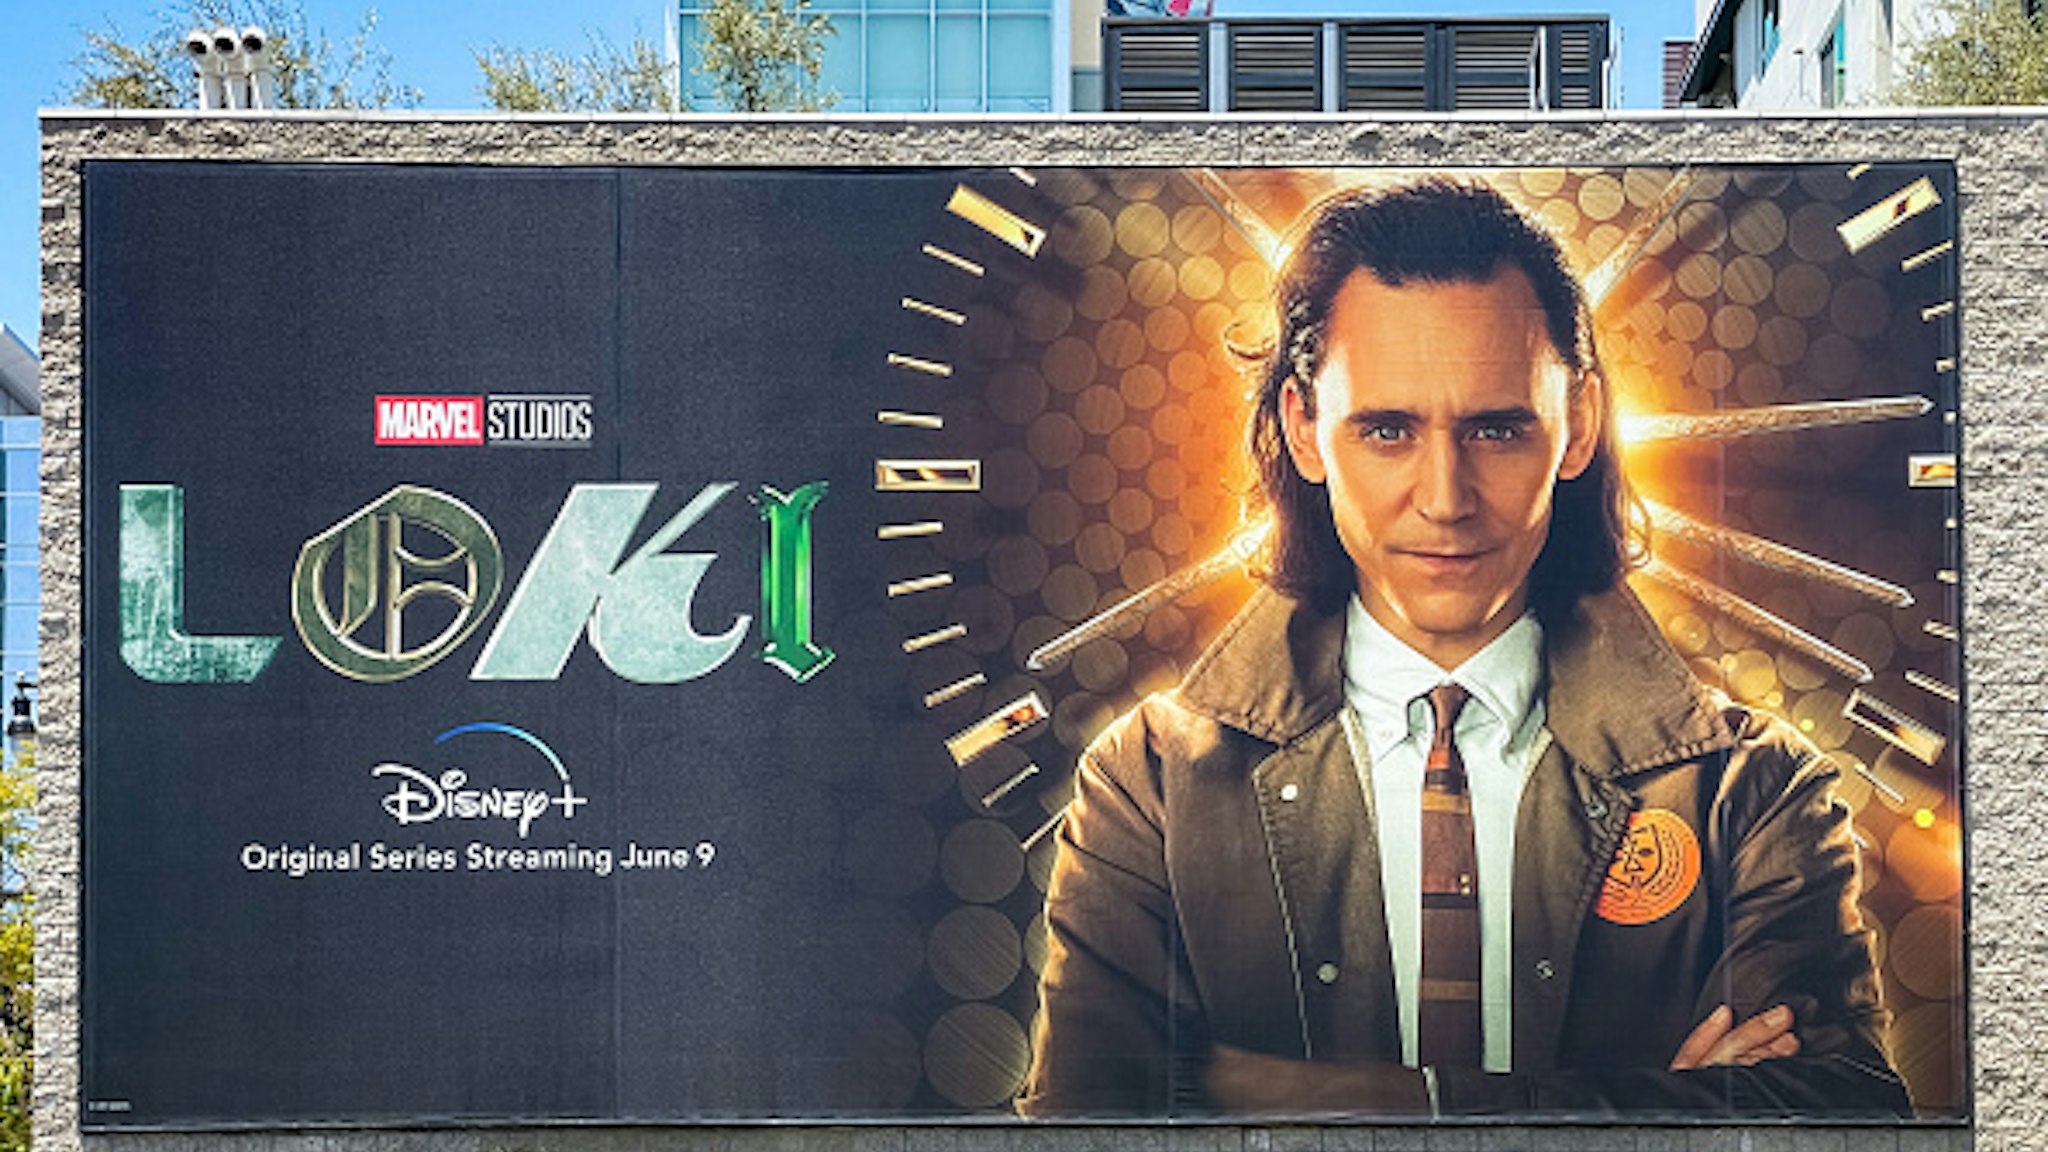 HOLLYWOOD, CA - JUNE 04: General view of a billboard near Hollywood &amp; Vine promoting the upcoming season of the Disney+ Marvel Studios flagship show 'Loki' on June 04, 2021 in Hollywood, California.